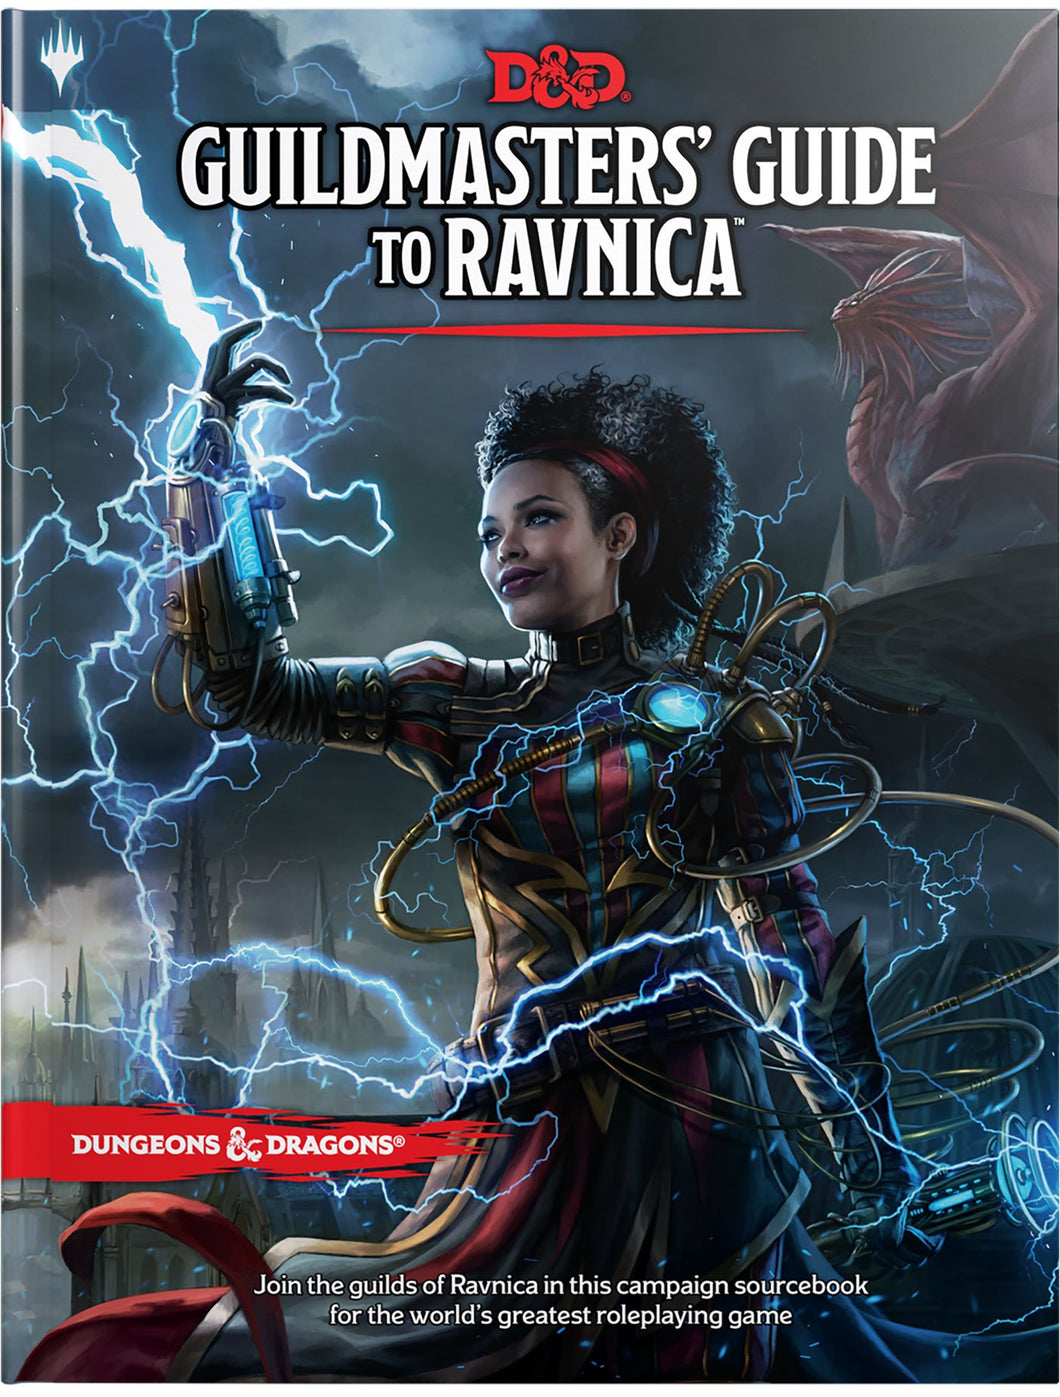 DUNGEONS AND DRAGONS 5E: GUILDMASTER'S GUIDE TO RAVNICA